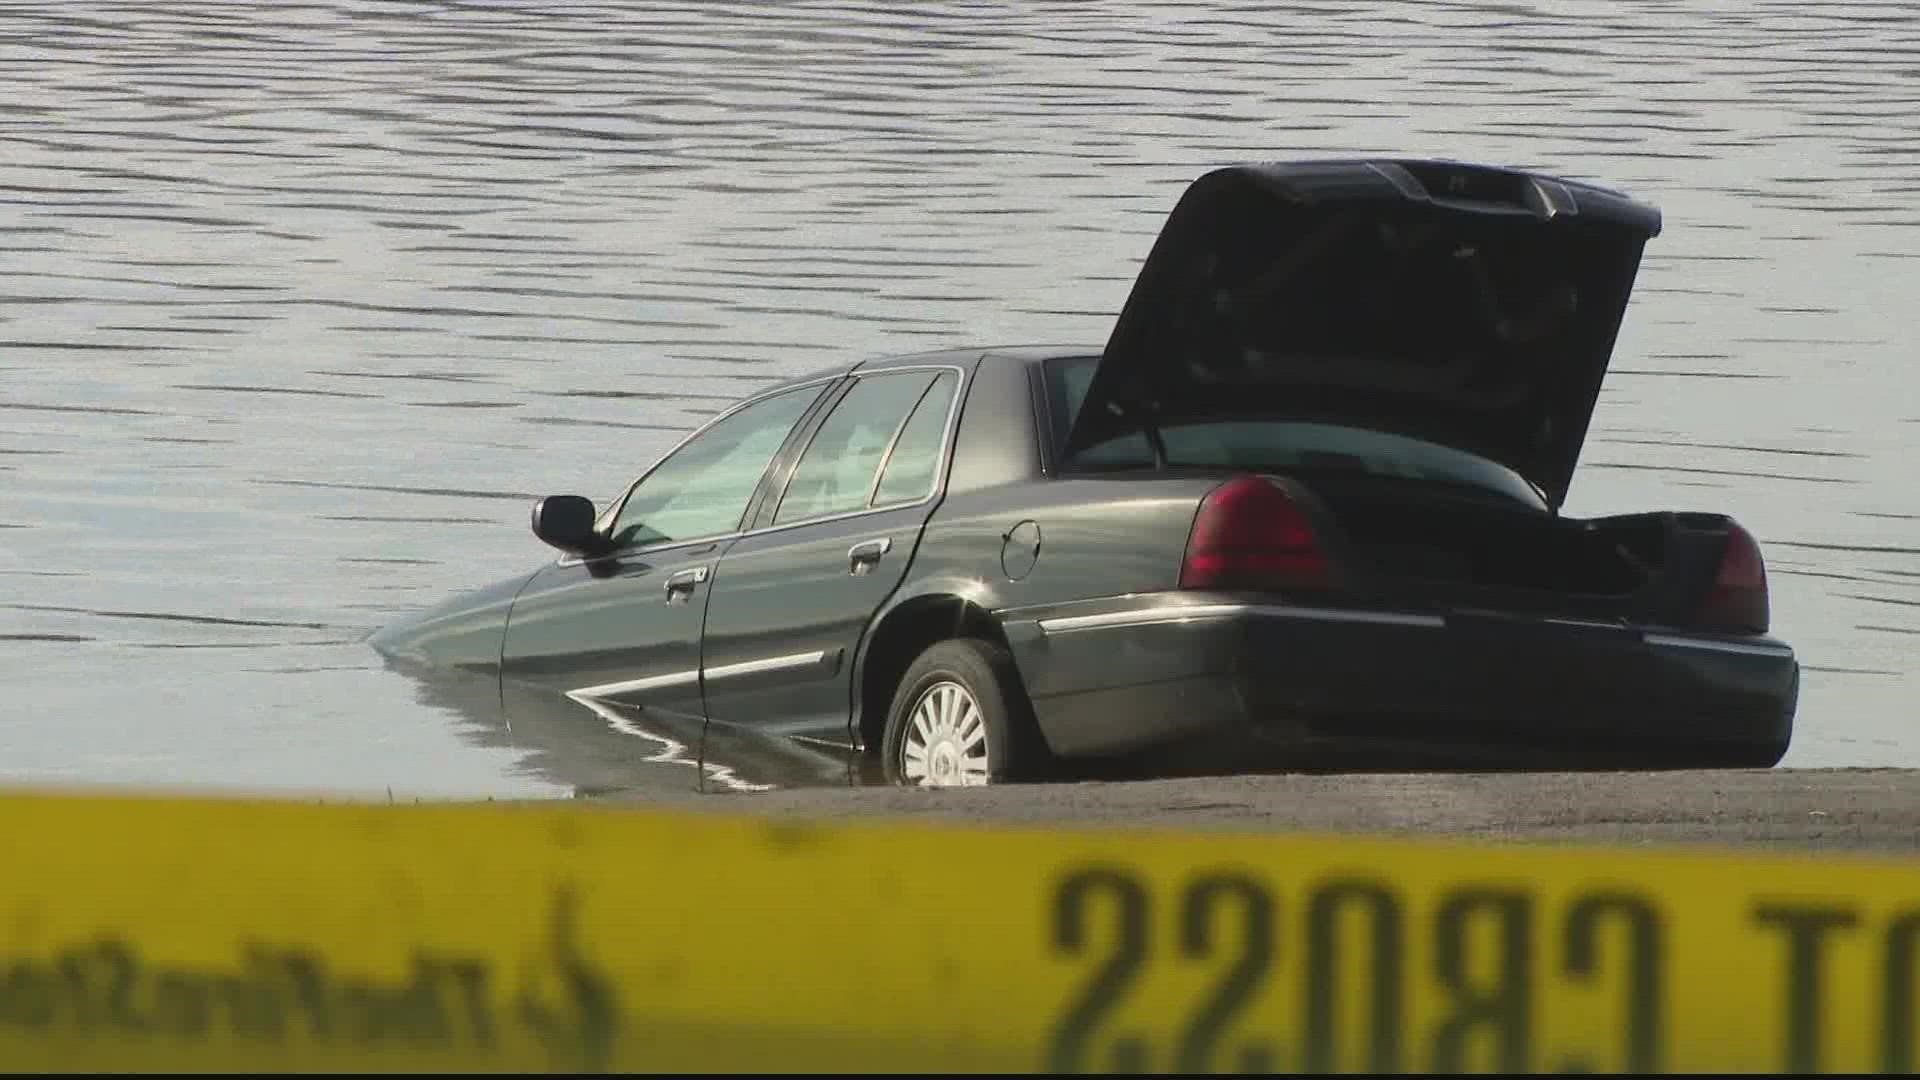 Police in Montgomery County found a man dead inside a car in the Potomac River Sunday morning.